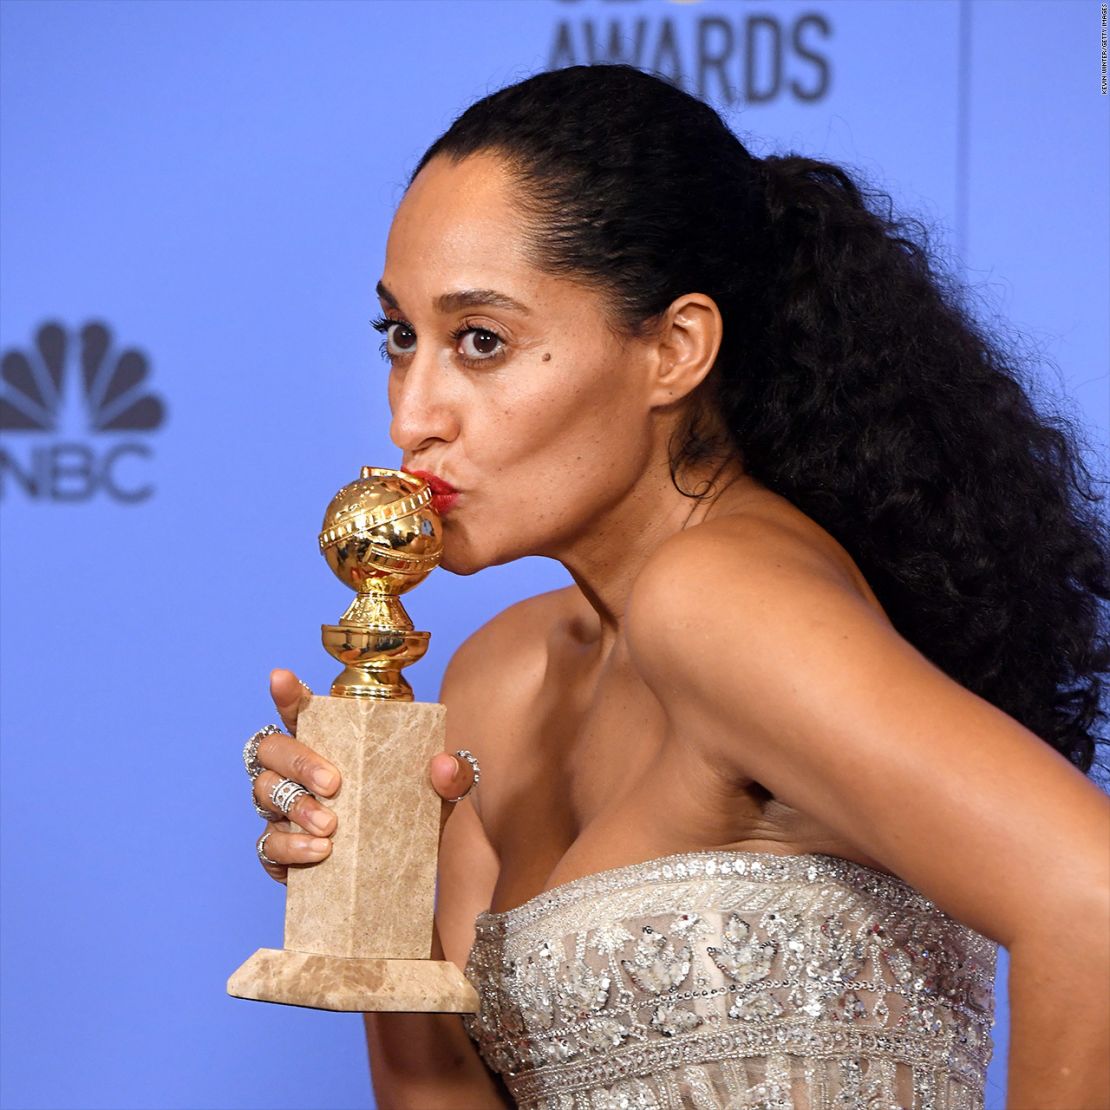 Tracee Ellis Ross won best actress in a television series, musical or comedy for her role in "black-ish."